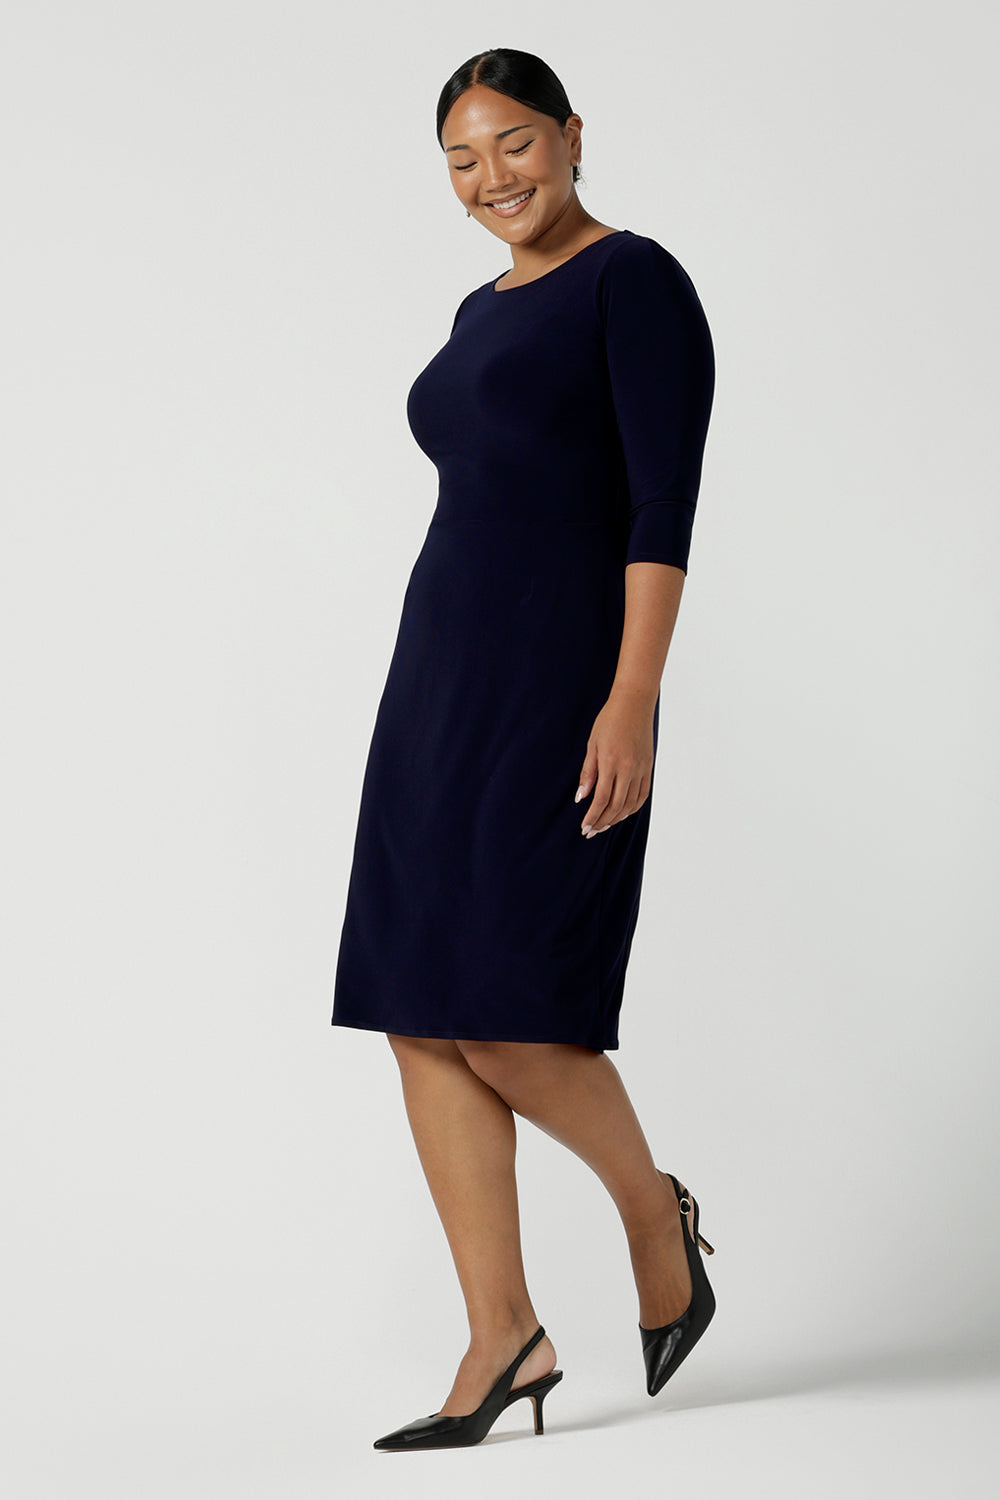 A size 10 woman wears the Audrey Shift Dress in Navy is the perfect all season shift dress. Soft jersey fabric, 3/4 sleeves and pockets. Made in Australia for women size 8 - 24.